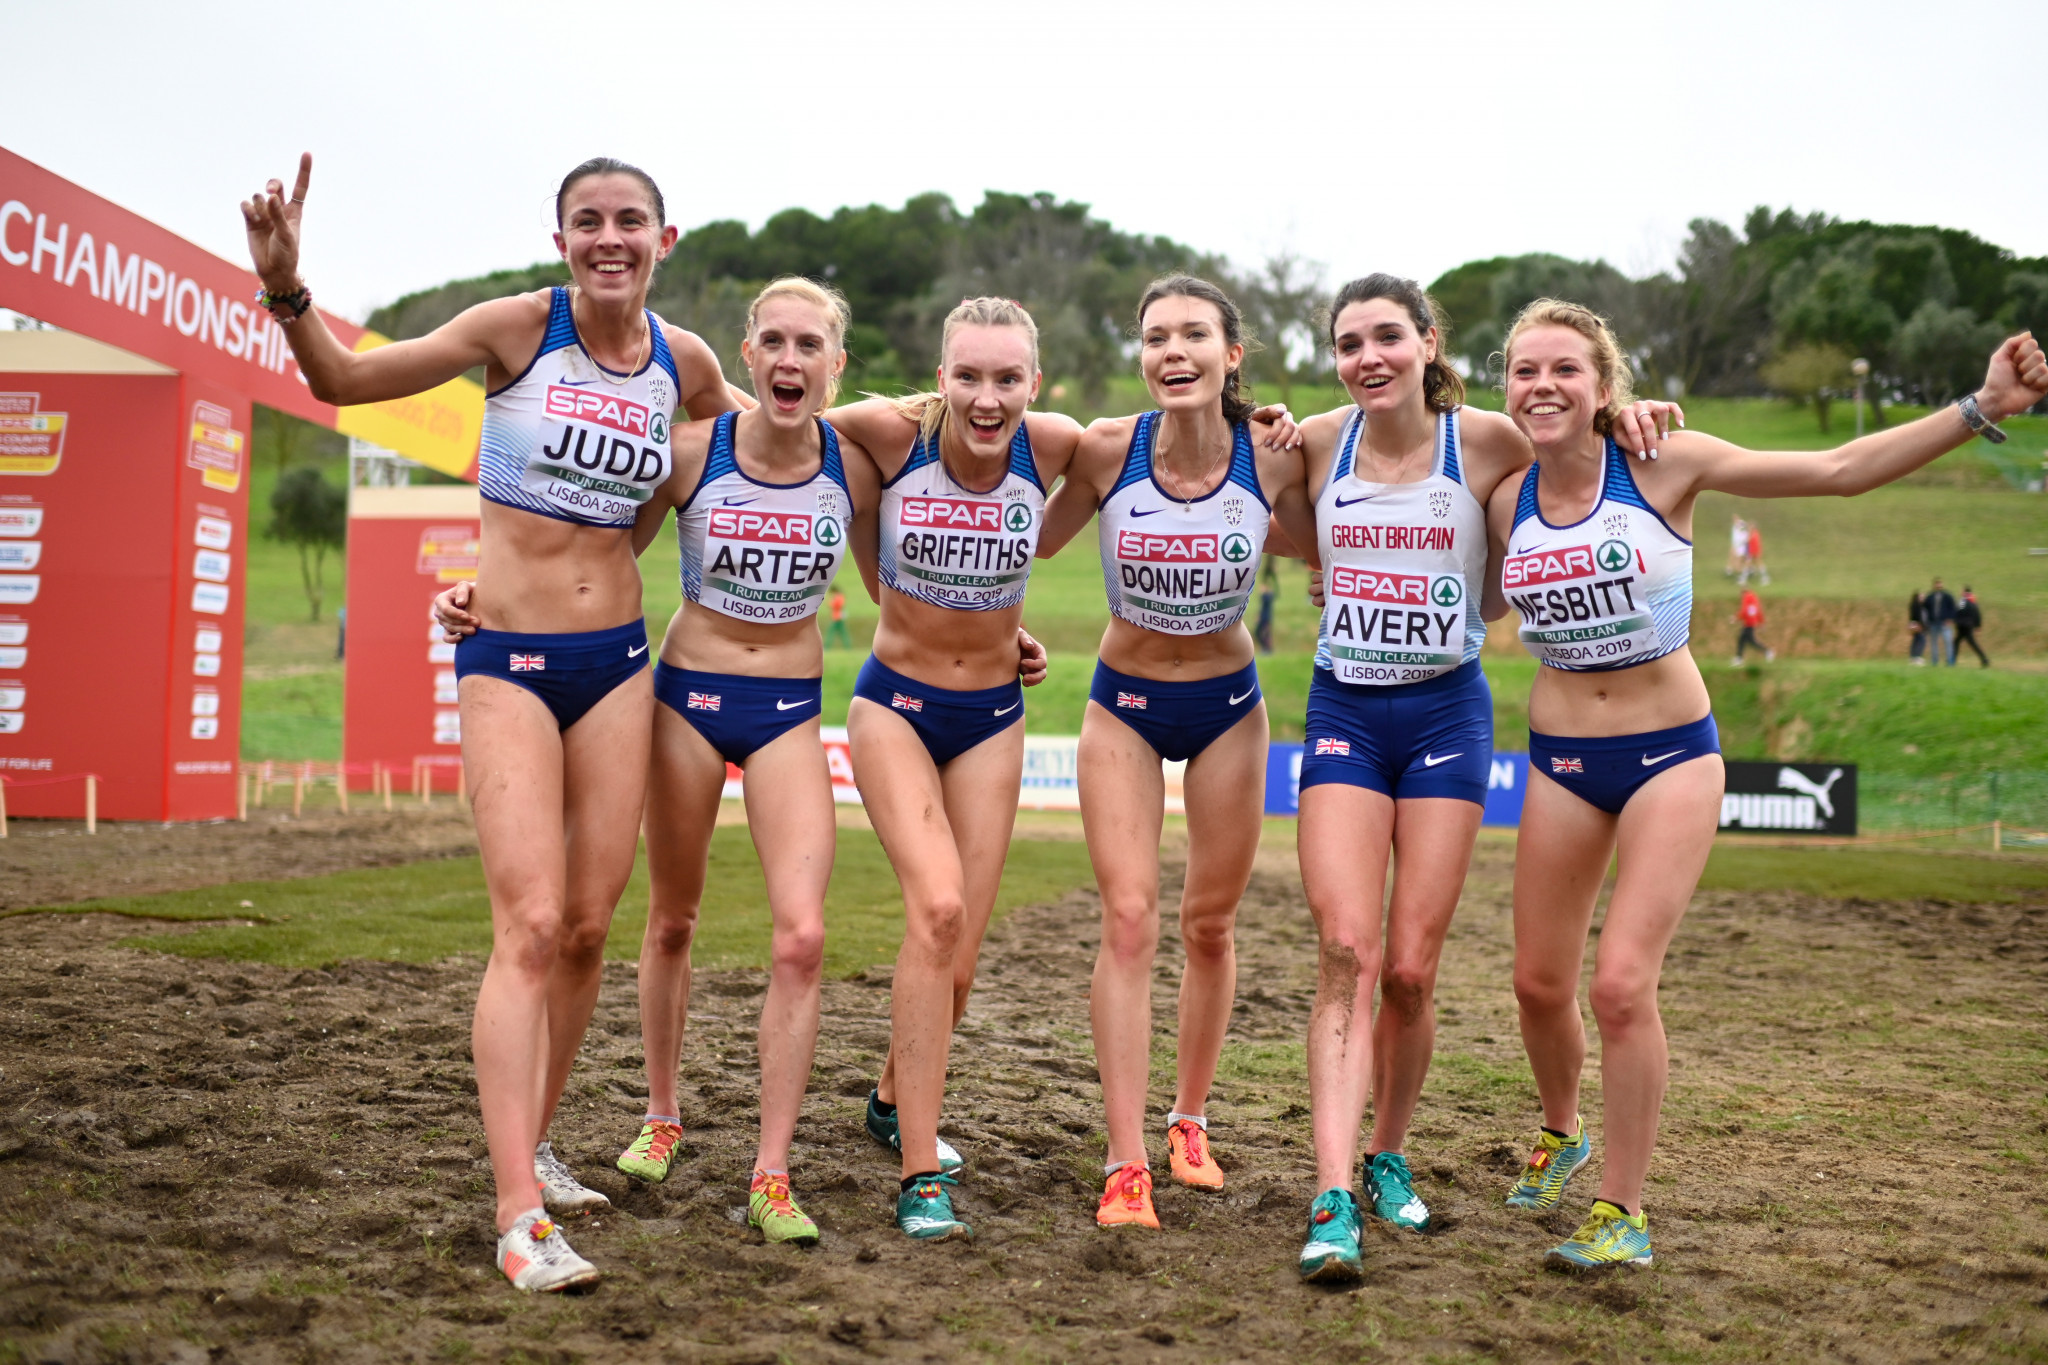  World Athletics Cross Country Tour begins in Cardiff after one-year absence